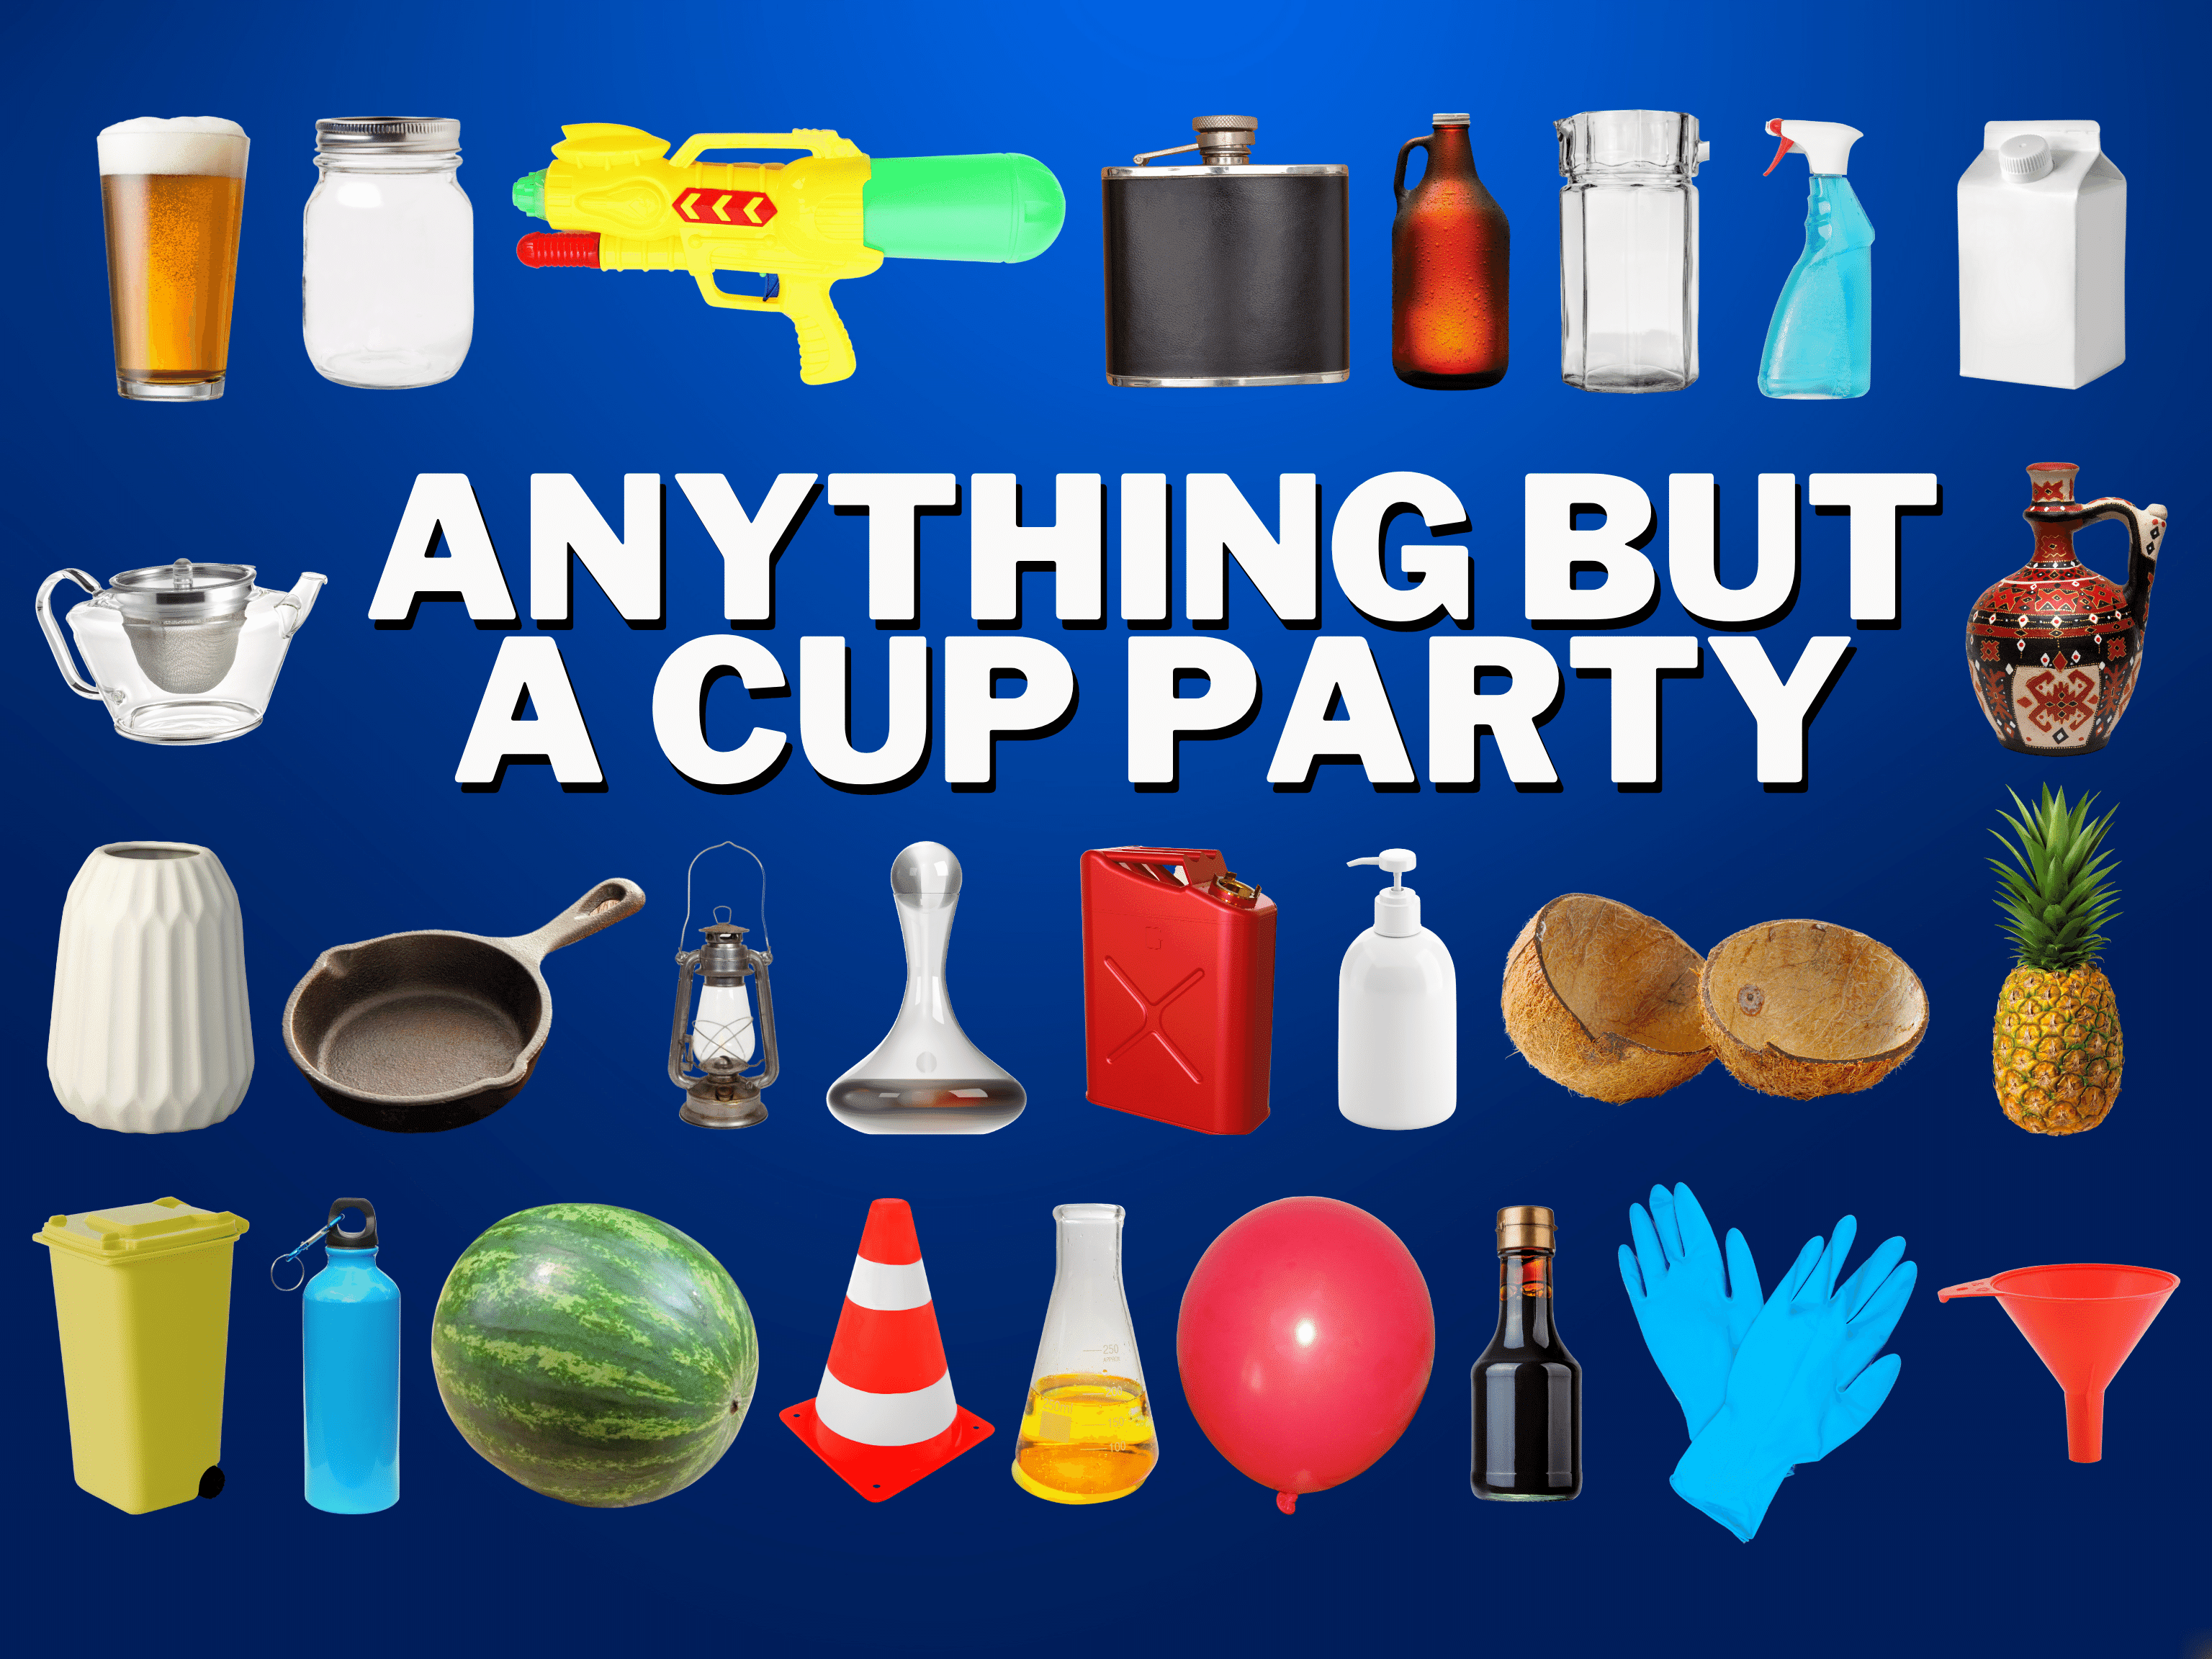 32 Funny Ideas for Anything but a Cup Party